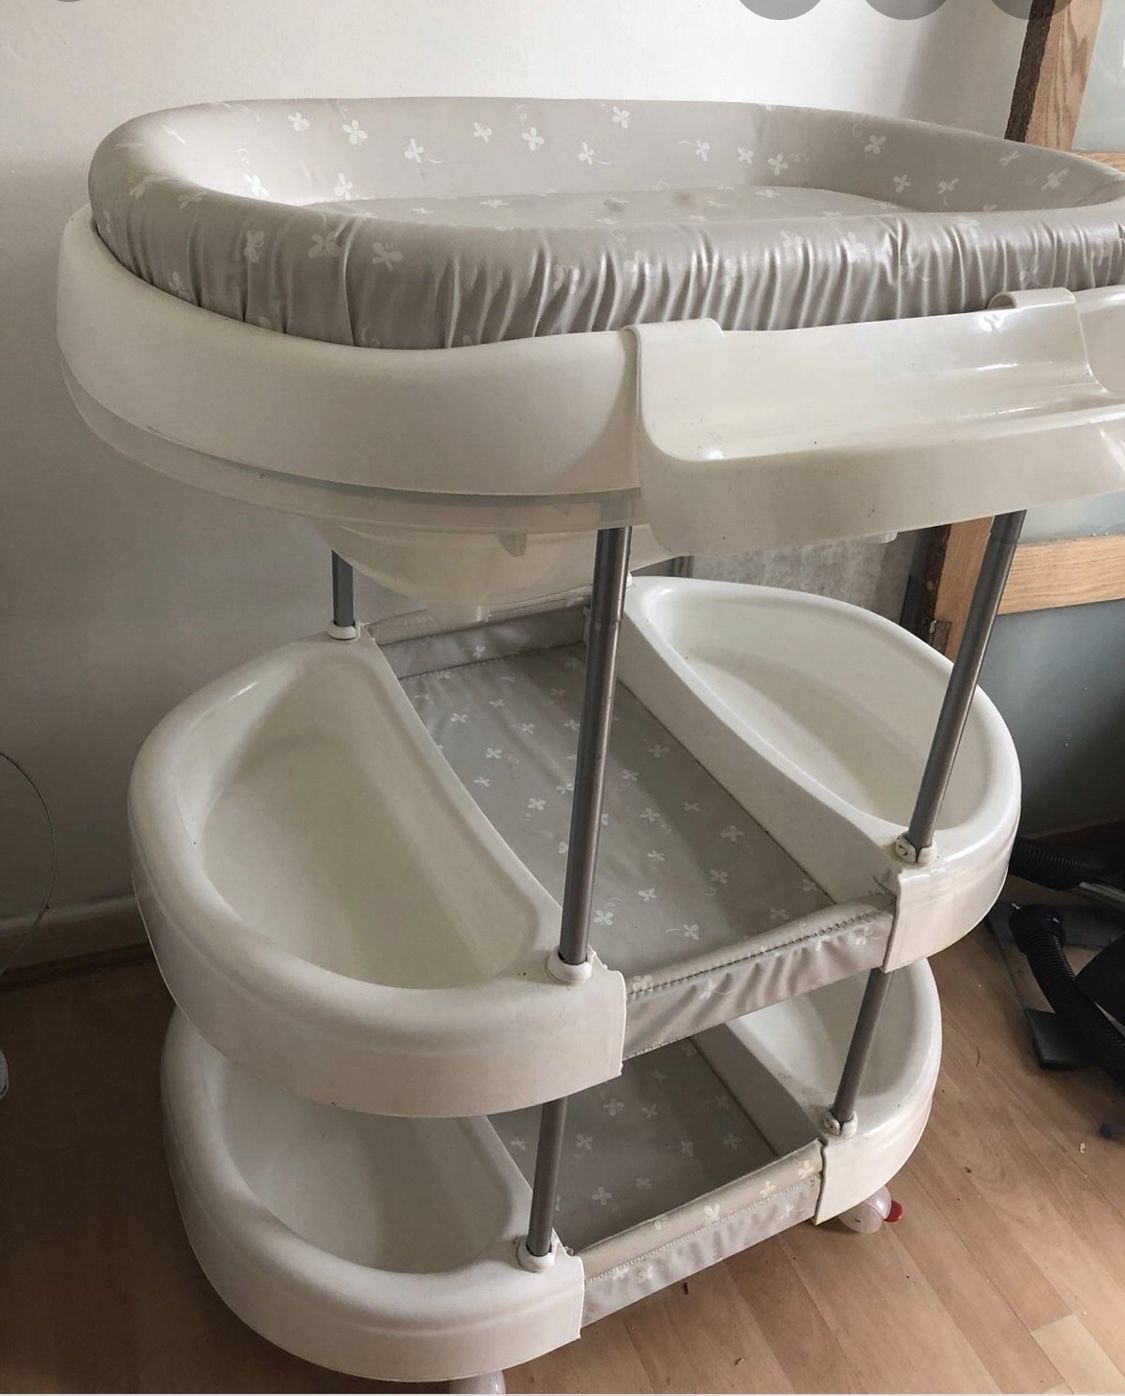 Brevi European baby bathtub and changing table $50 paid $450